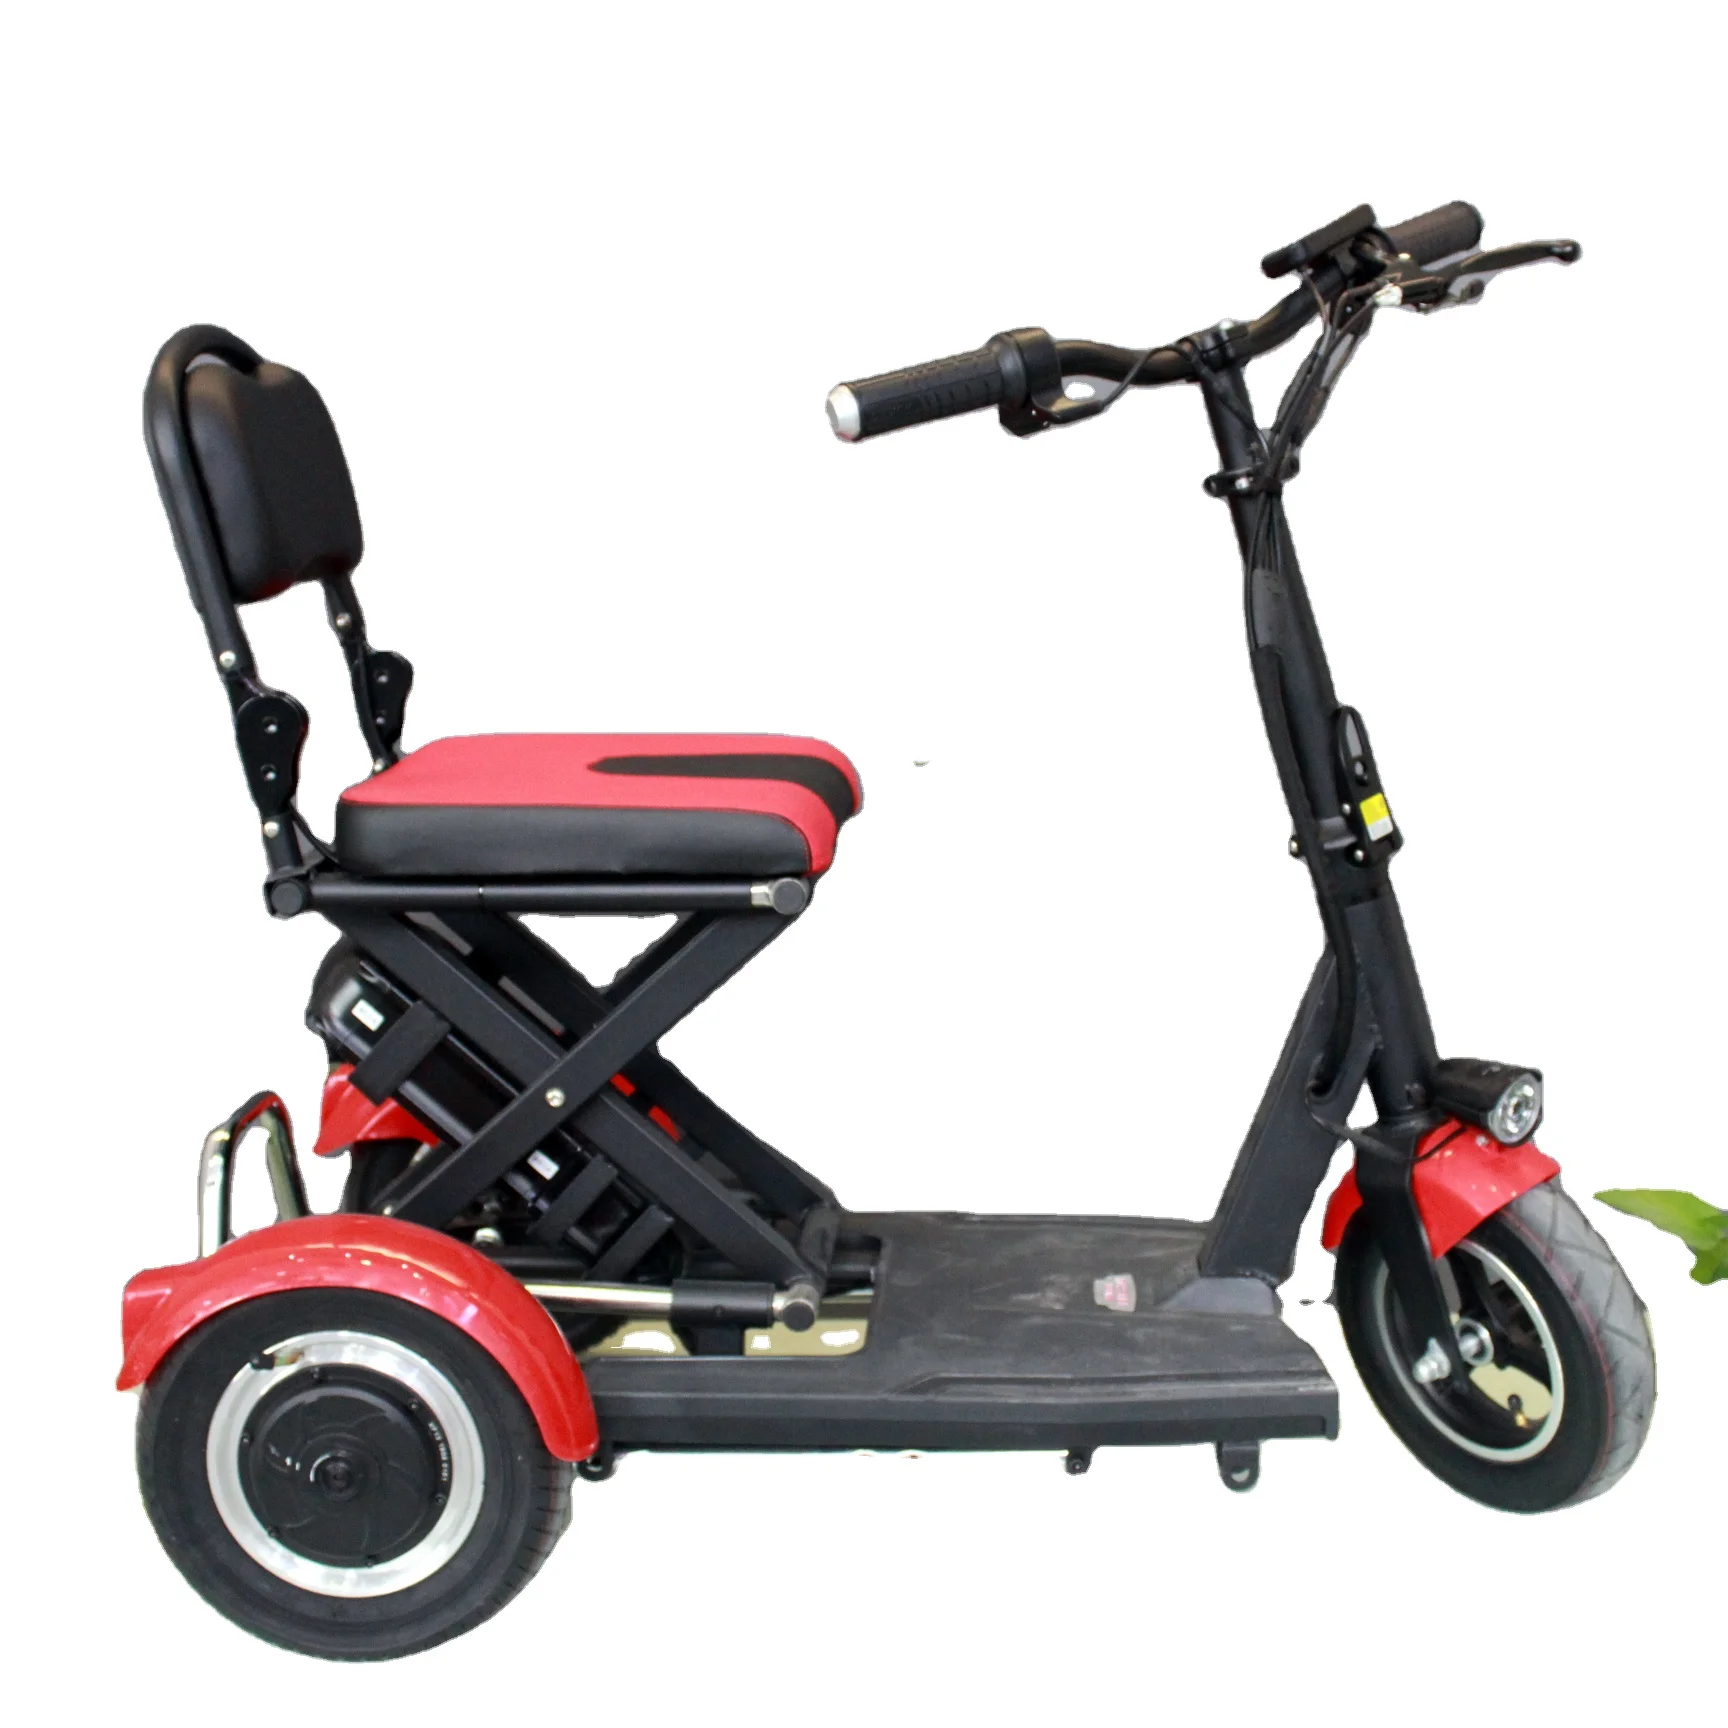 Electric Scooter Folding Type For Elderly And Disabled Handicapped Scooters 36v/48v 10Ah Lithium Battery Motor Scooter custom engwe t14 folding electric bicycle 14 inch tire 350w brushless motor 48v 10ah battery 33km h max speed 80km range 100kg load white